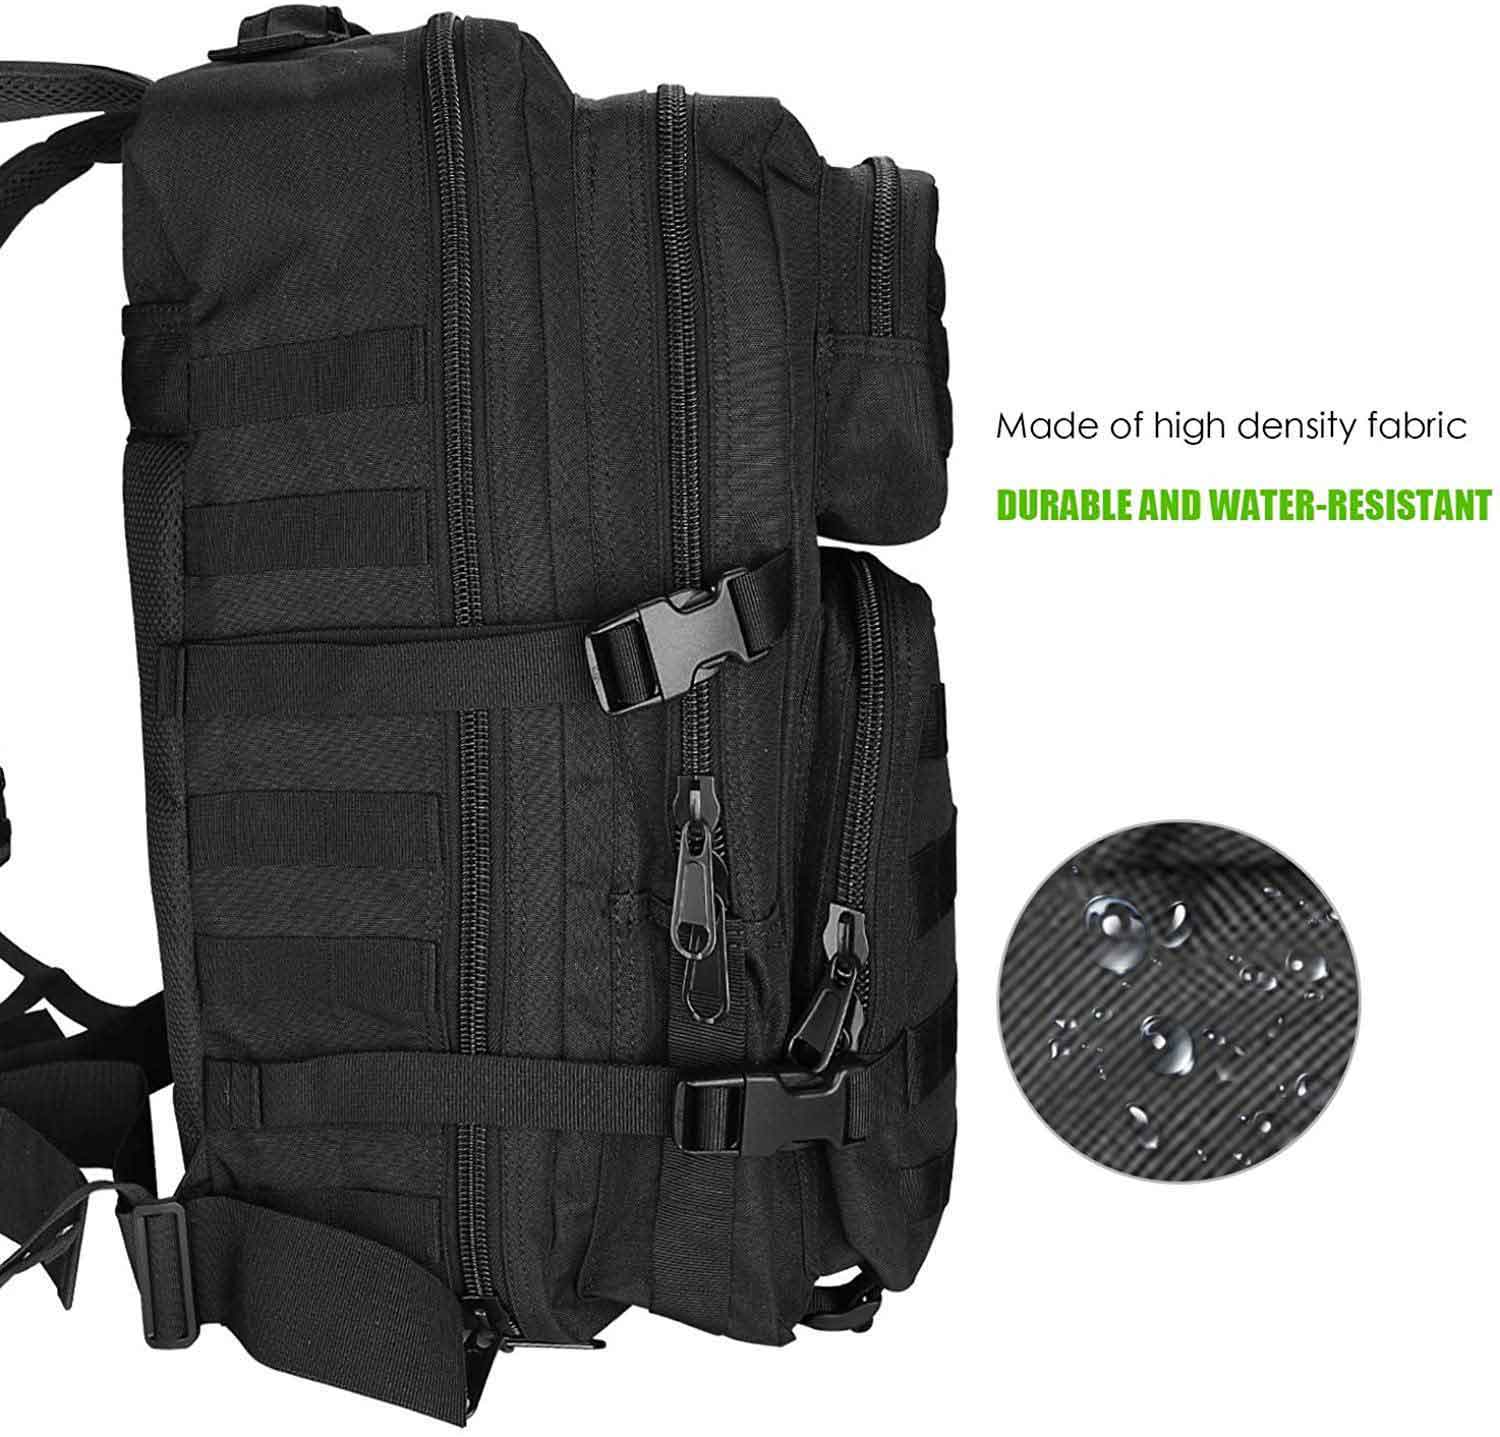  | tactical backpack brands |  tactical backpack amazon |  tactical backpack made in usa |  tactical backpack for guns |  tactical backpack accessories |  tactical backpack near me |  tactical backpack patches |  tactical backpack small |  tactical backpack academy |  tactical backpack ar pistol |  tactical backpack armor |  tactical backpack afterpay |  tactical backpack australia |  tactical backpack army |  packing a tactical backpack |  high and tactical backpack |  what is a tactical backpack |  how to clean a tactical backpack |  how to make a tactical backpack |  what is the best tactical backpack |  what should be in a tactical go bag |  tactical backpack black |  tactical backpack bulletproof |  tactical backpack body armor |  tactical backpack baby |  tactical backpack big 5 |  tactical backpack bass pro |  tactical backpack best |  b-tactical |  tactical backpack cooler |  tactical backpack companies |  tactical backpack coyote brown |  tactical backpack cheap |  tactical backpack camo |  tactical backpack clips |  tactical backpack carry on |  tactical backpack condor |  s.o.c tactical backpack |  tactical backpack dayz |  tactical backpack diaper bag |  tactical backpack drago |  tactical backpack definition |  tactical backpack dubai |  tactical backpack dunham's |  tactical backpack desert |  tactical backpack discount | 